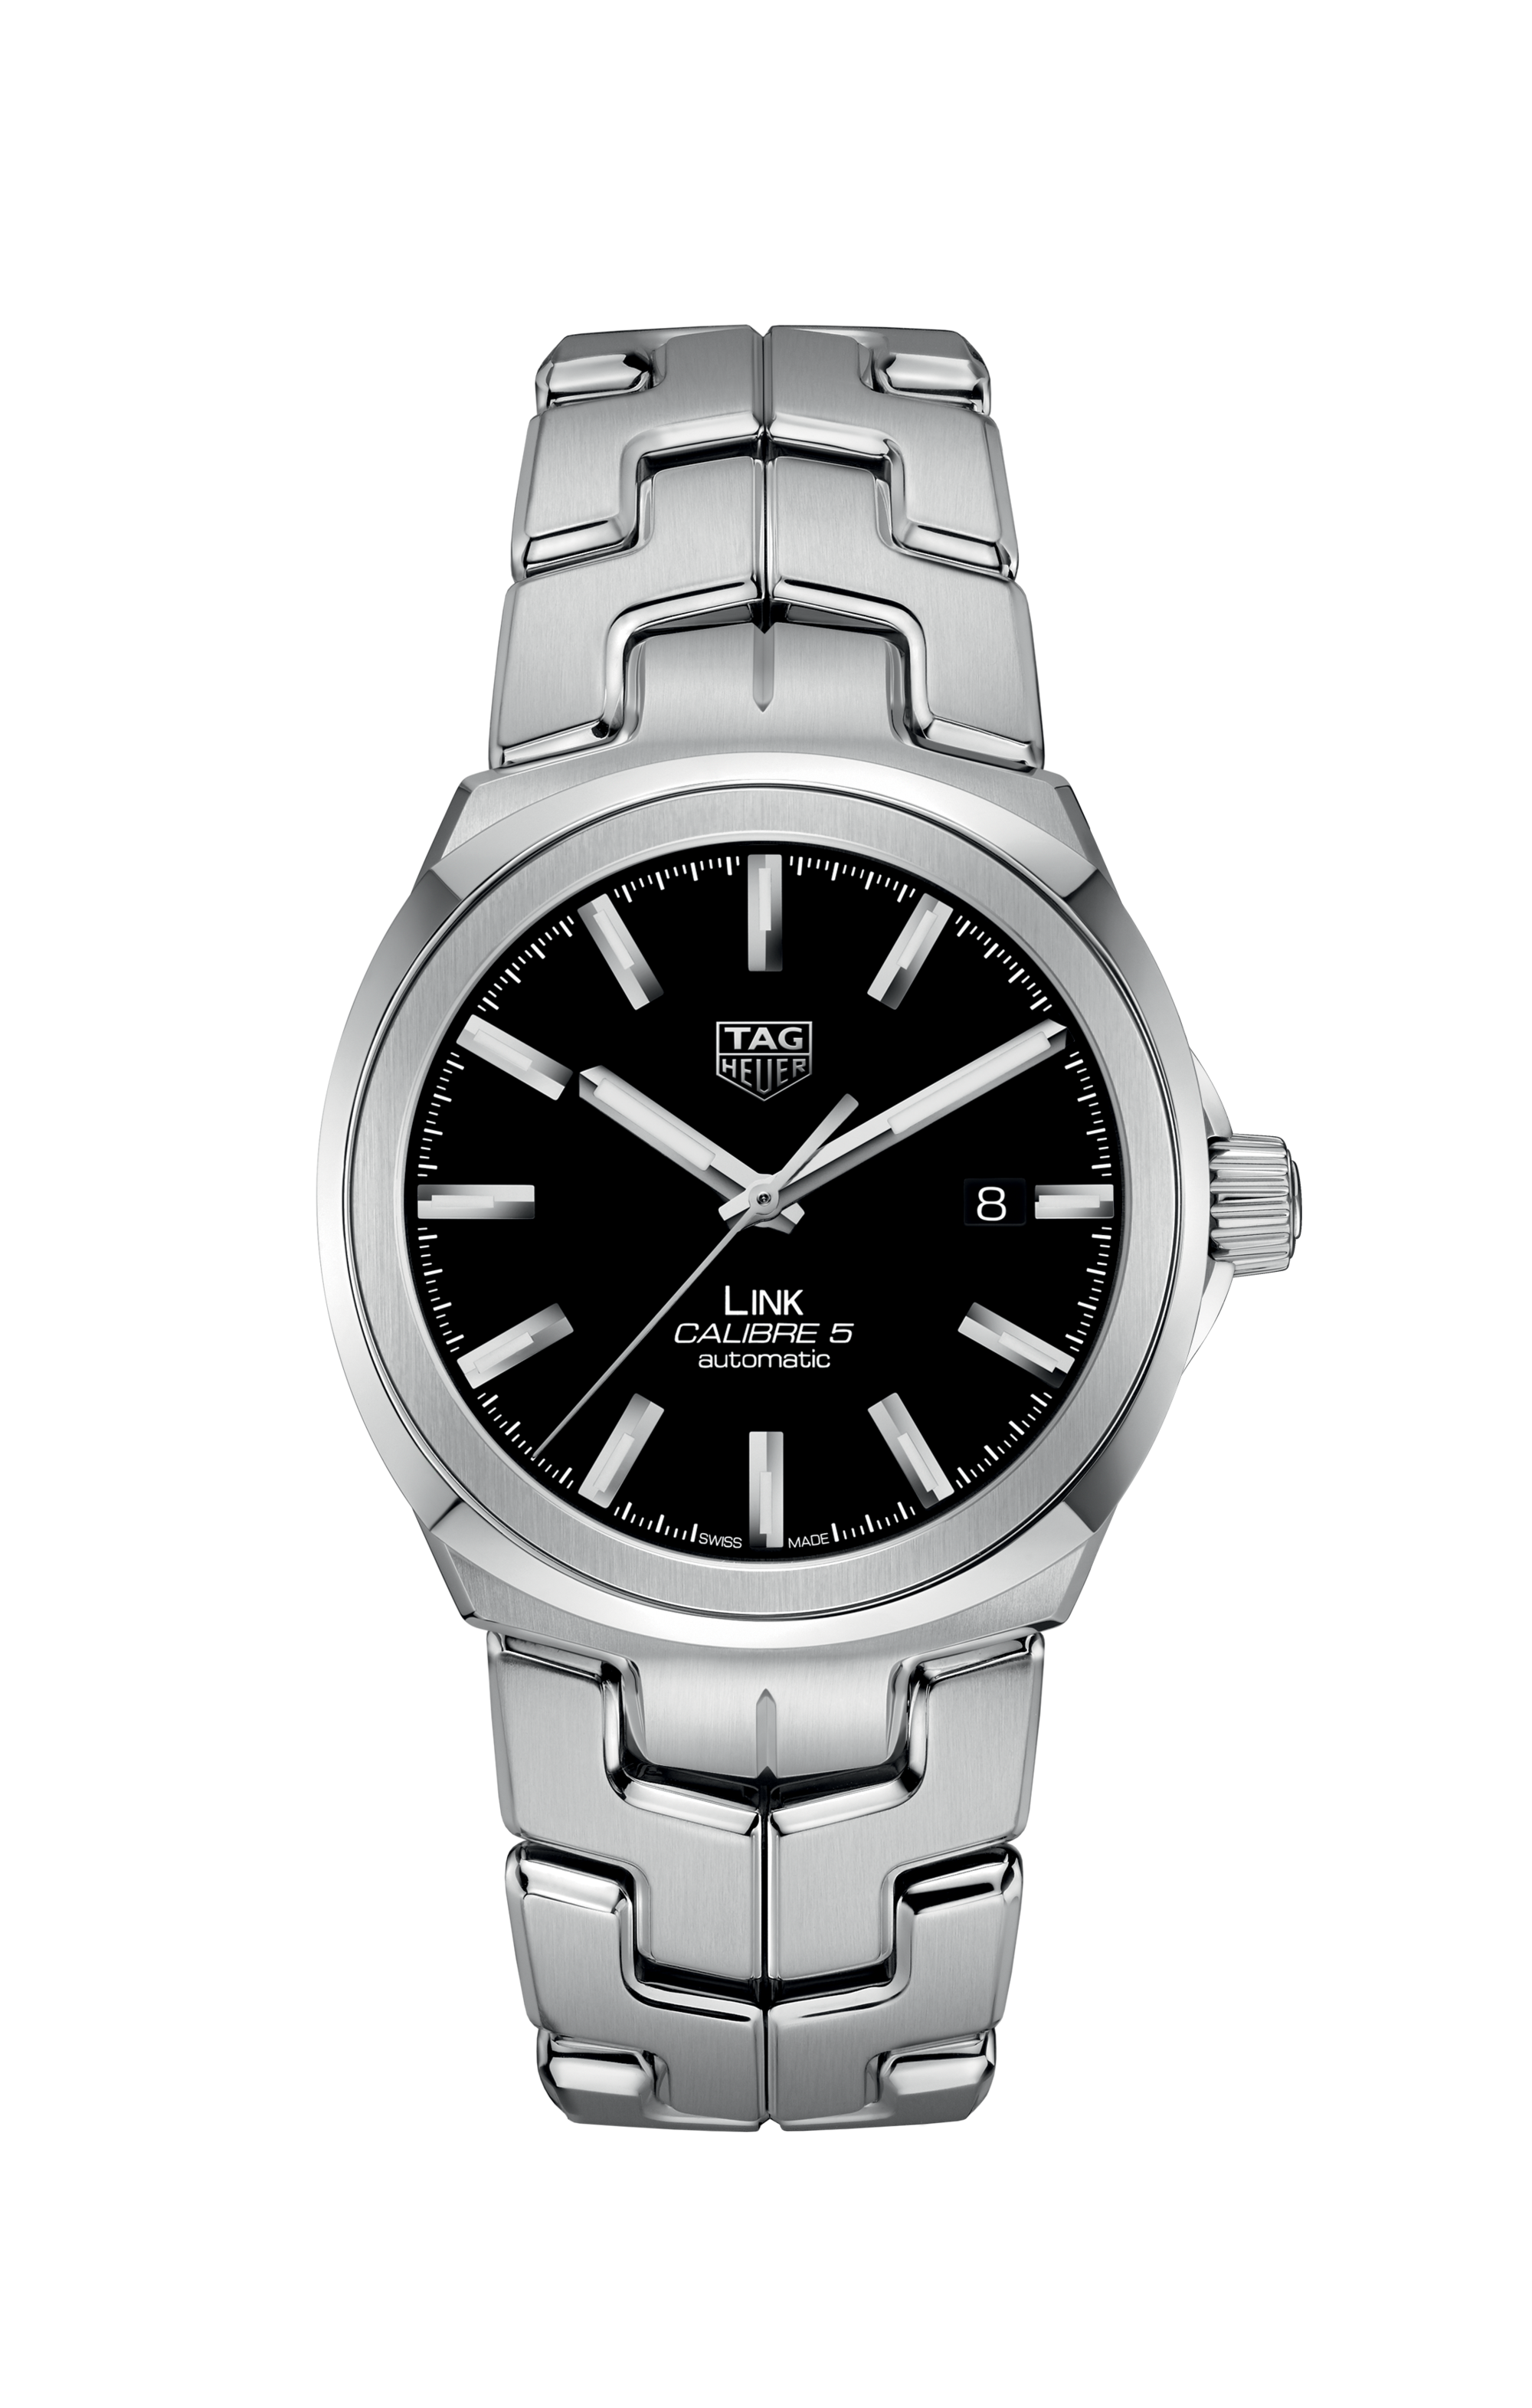 TAG Heuer WAP2010 Aquaracer Calibre 5 Automatic Stainless Steel Black Dial Watch